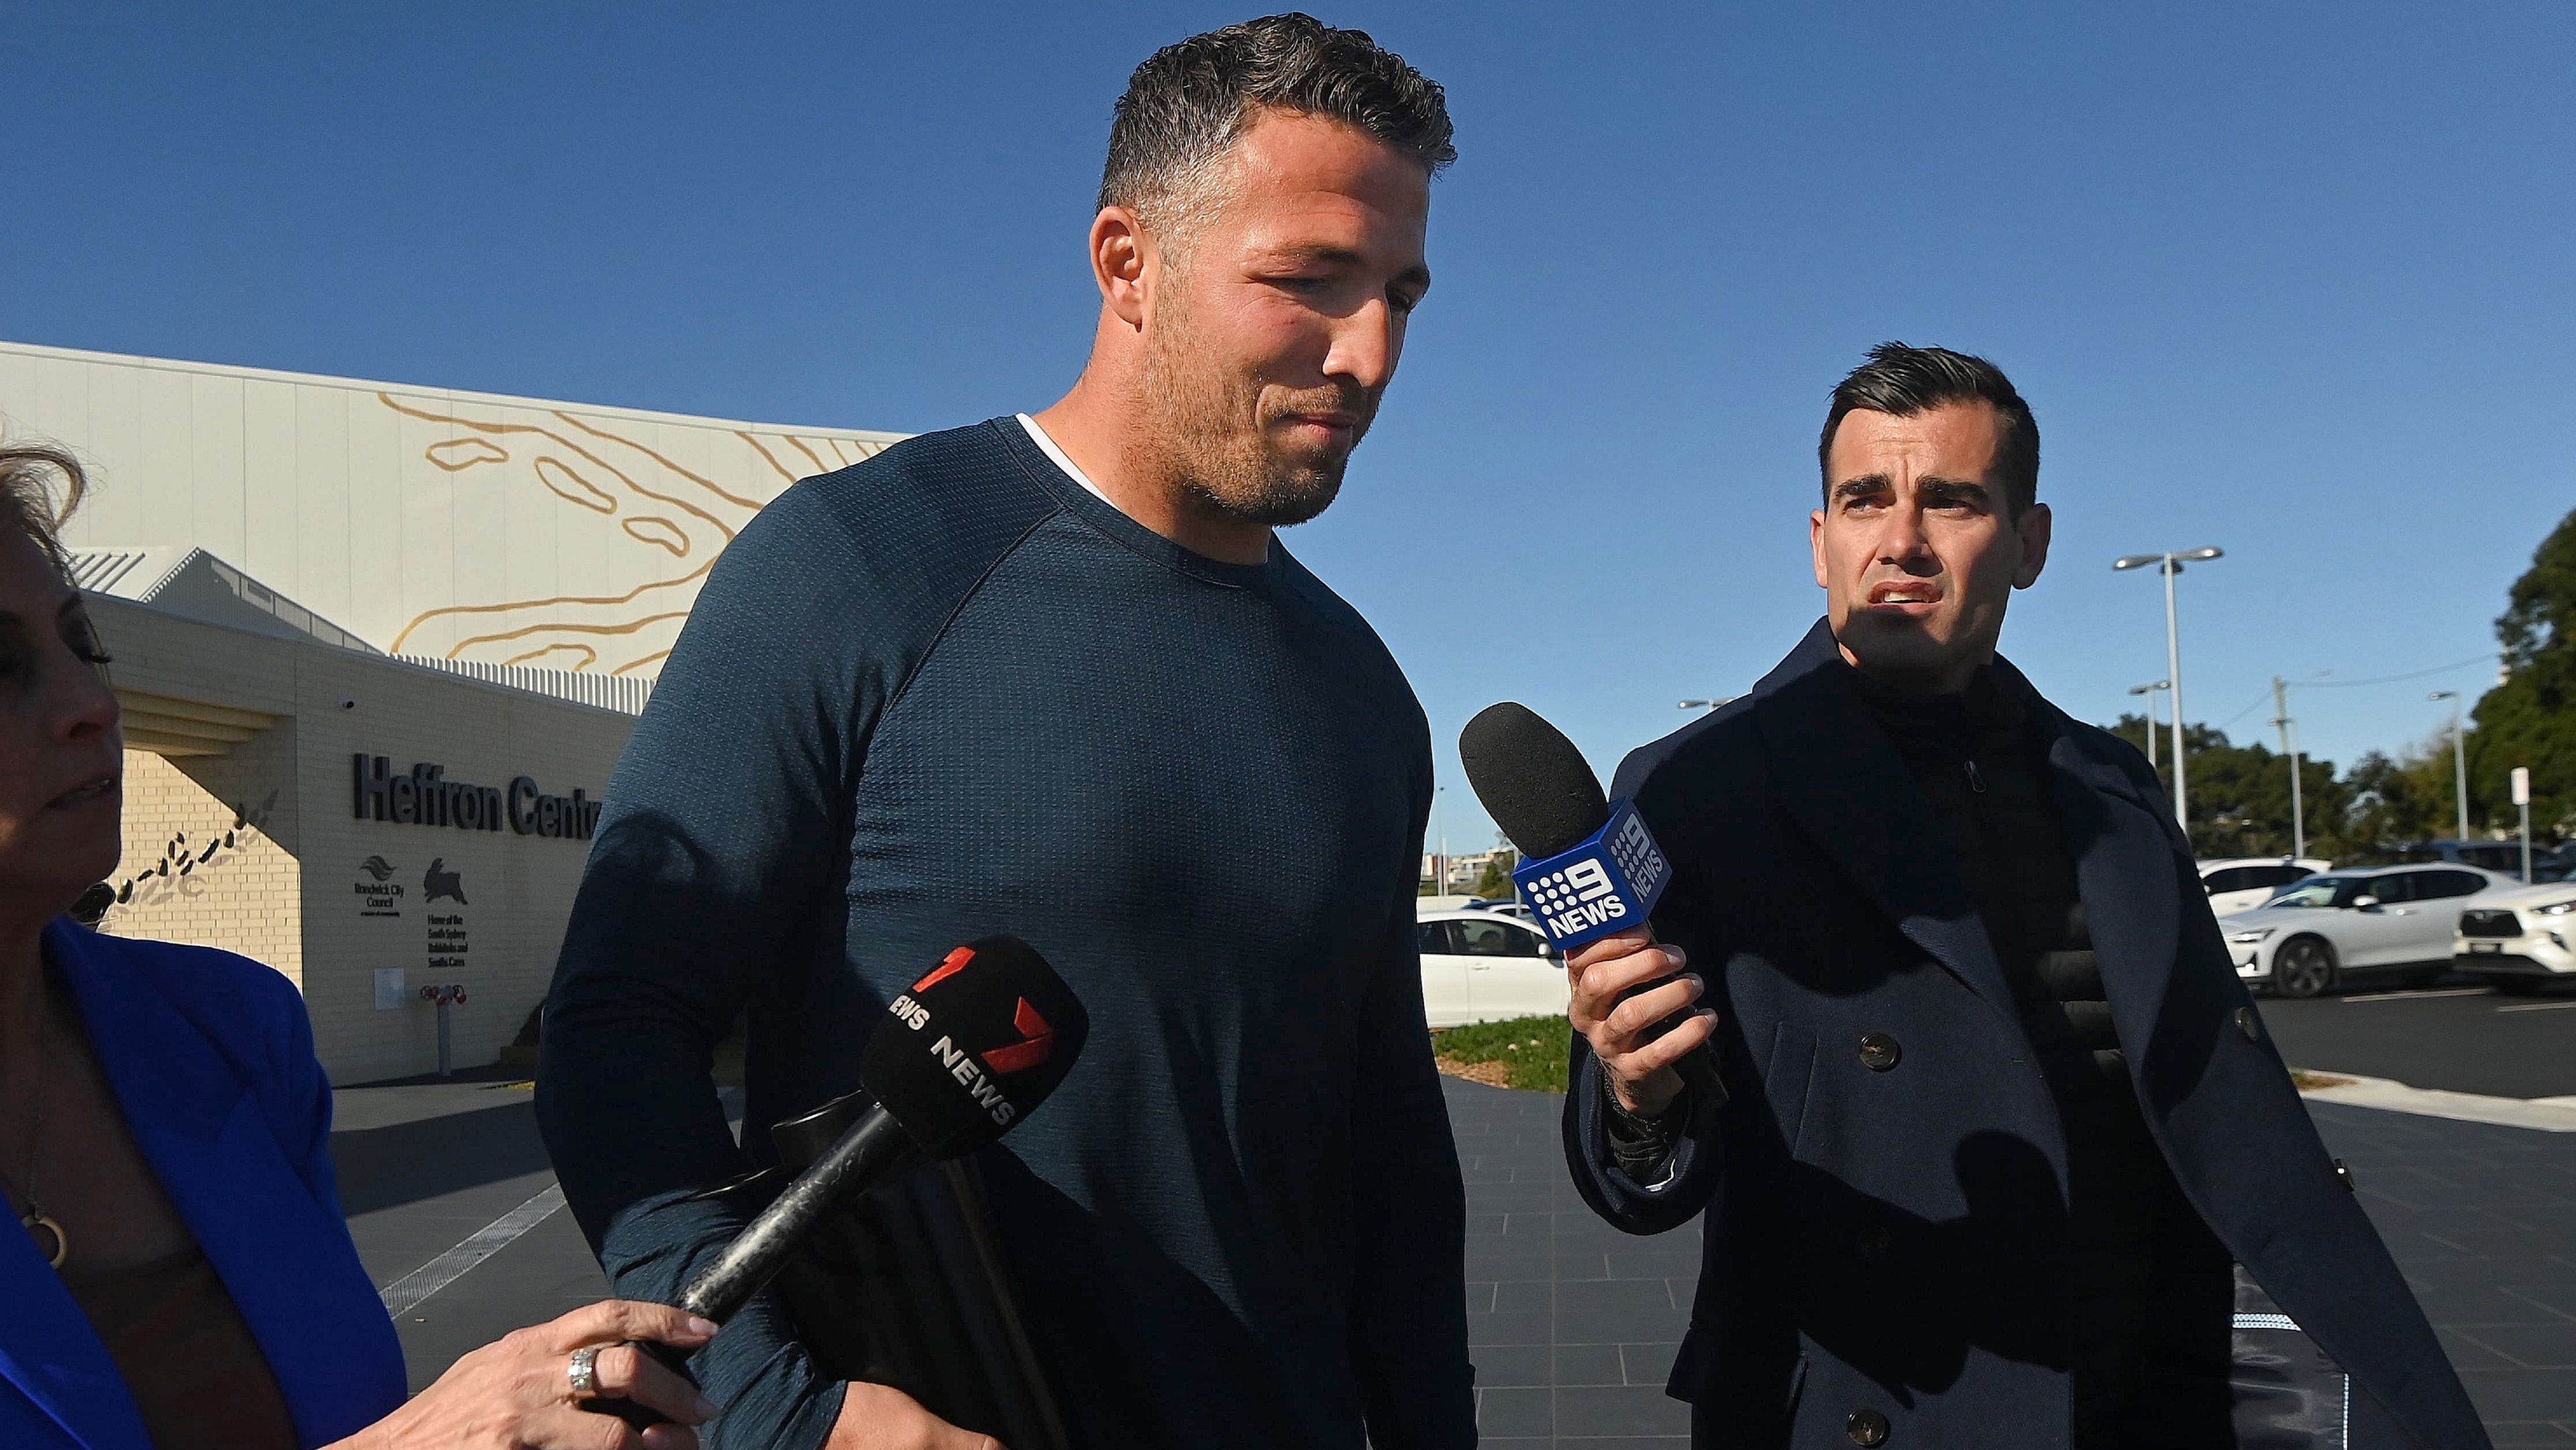 Sam Burgess leaves the Heffron Centre, home of the Rabittohs in Maroubra, after being axed as assistant coach.